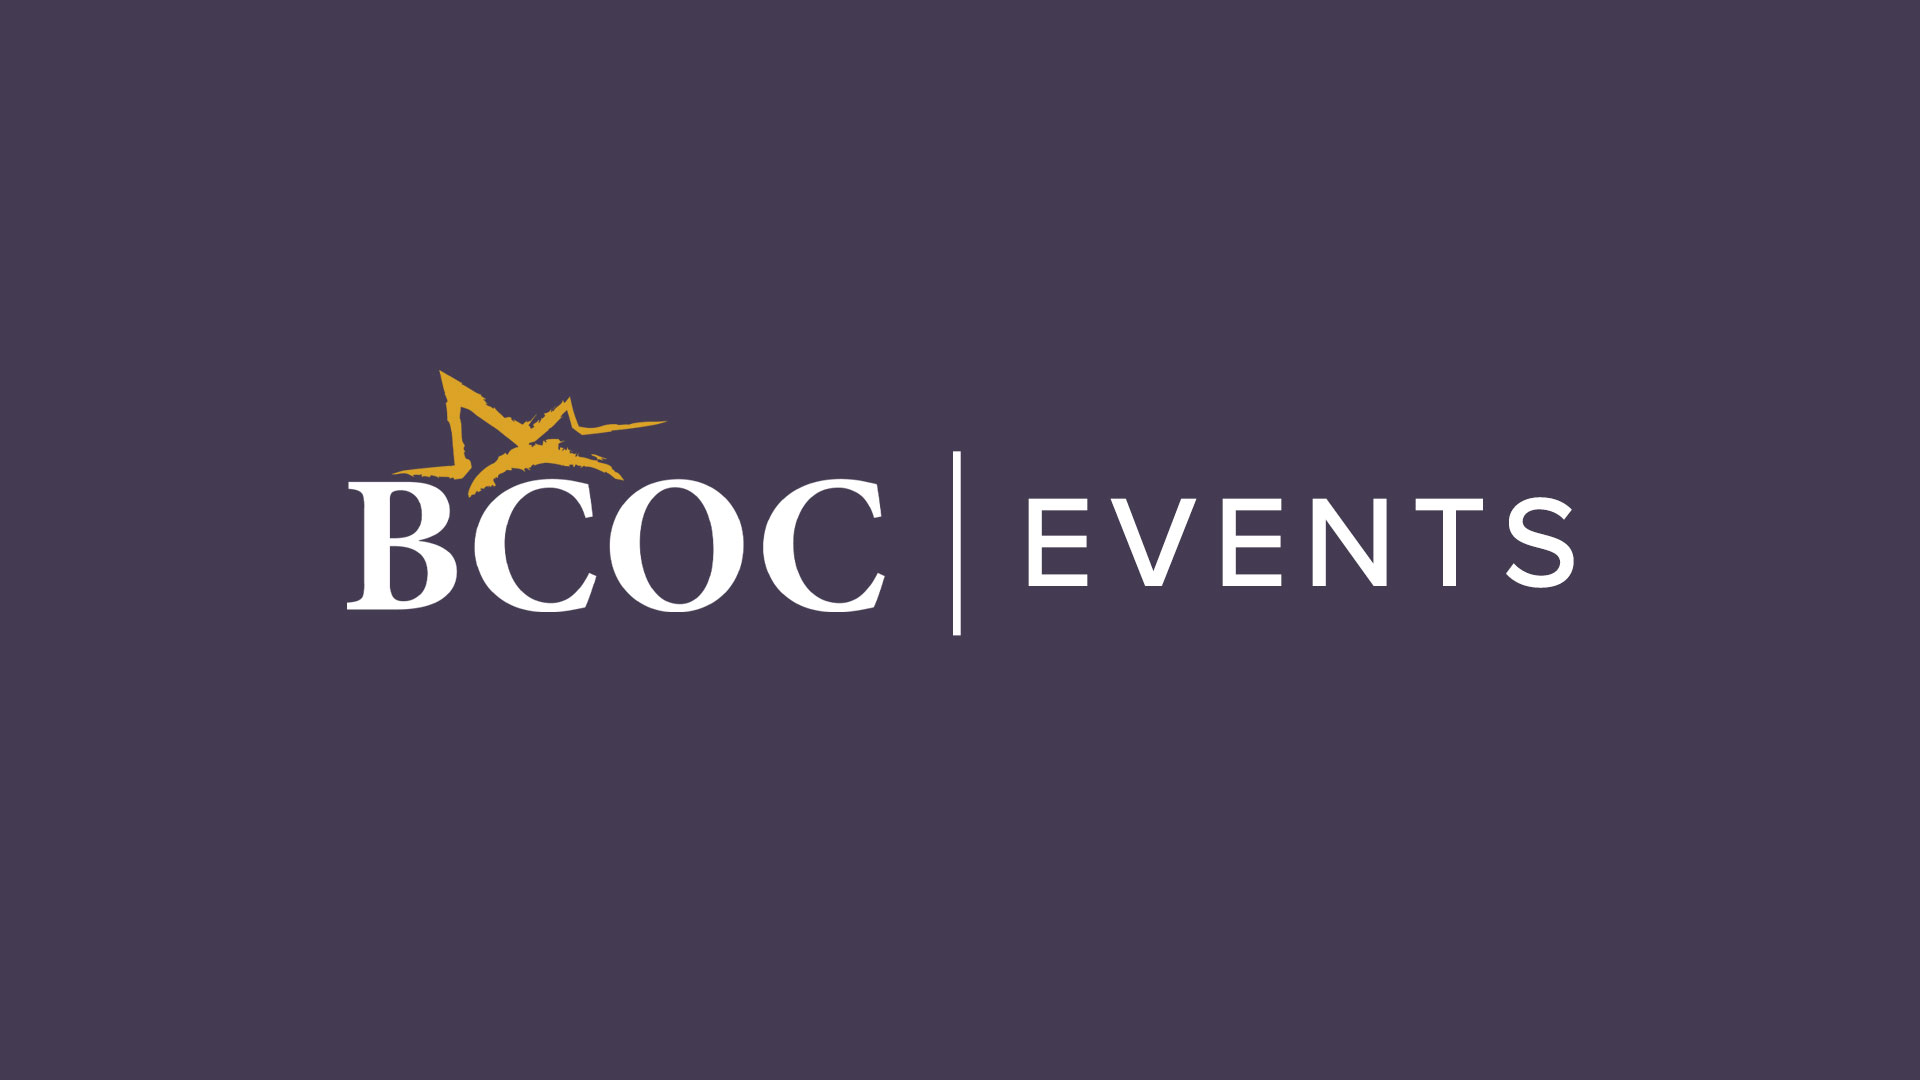 BCOC Events